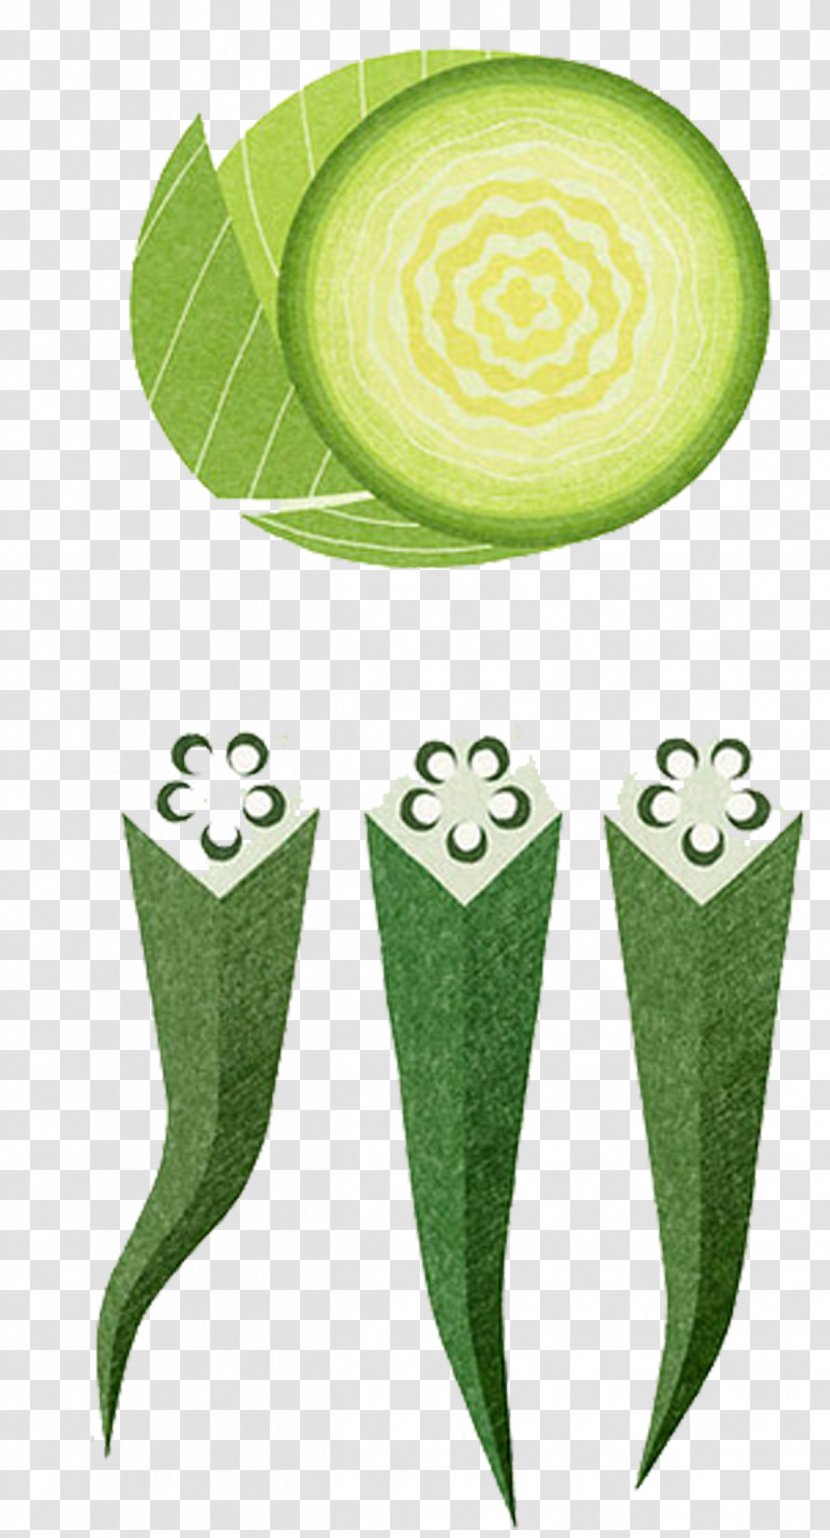 Okra Vegetable Painting Illustration - Grass - Hand-painted Cabbage Transparent PNG